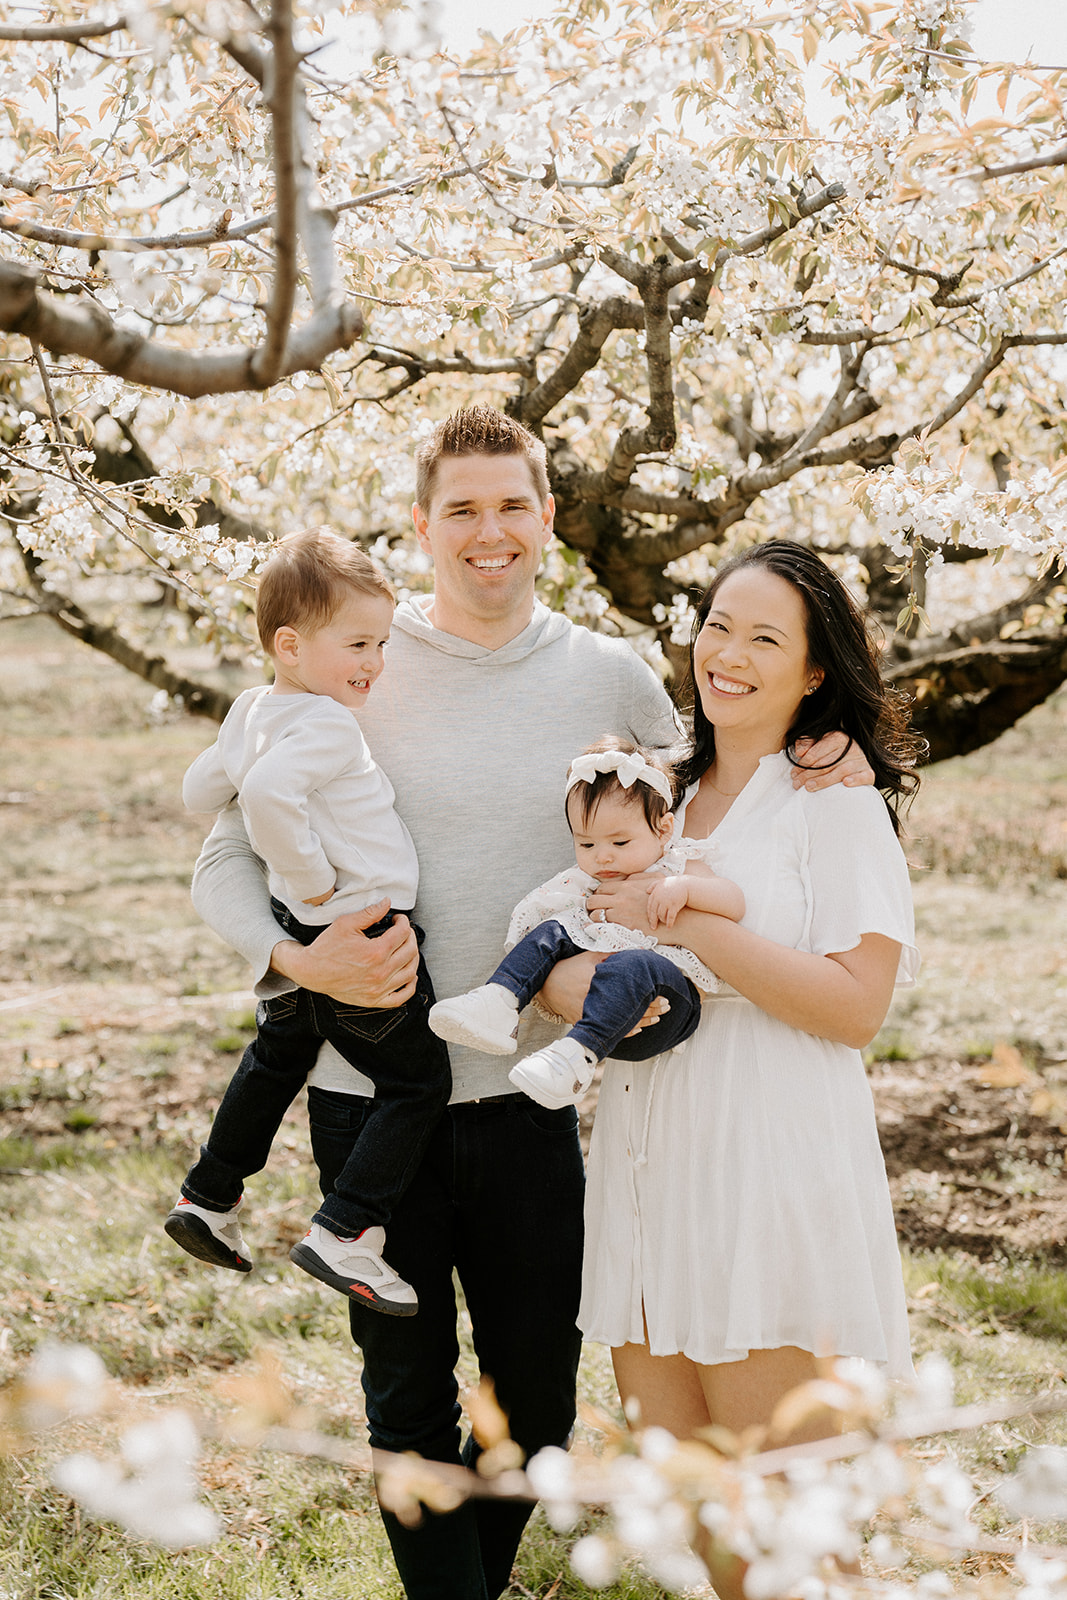 Family of four standing underneath a cherry blossom tree.